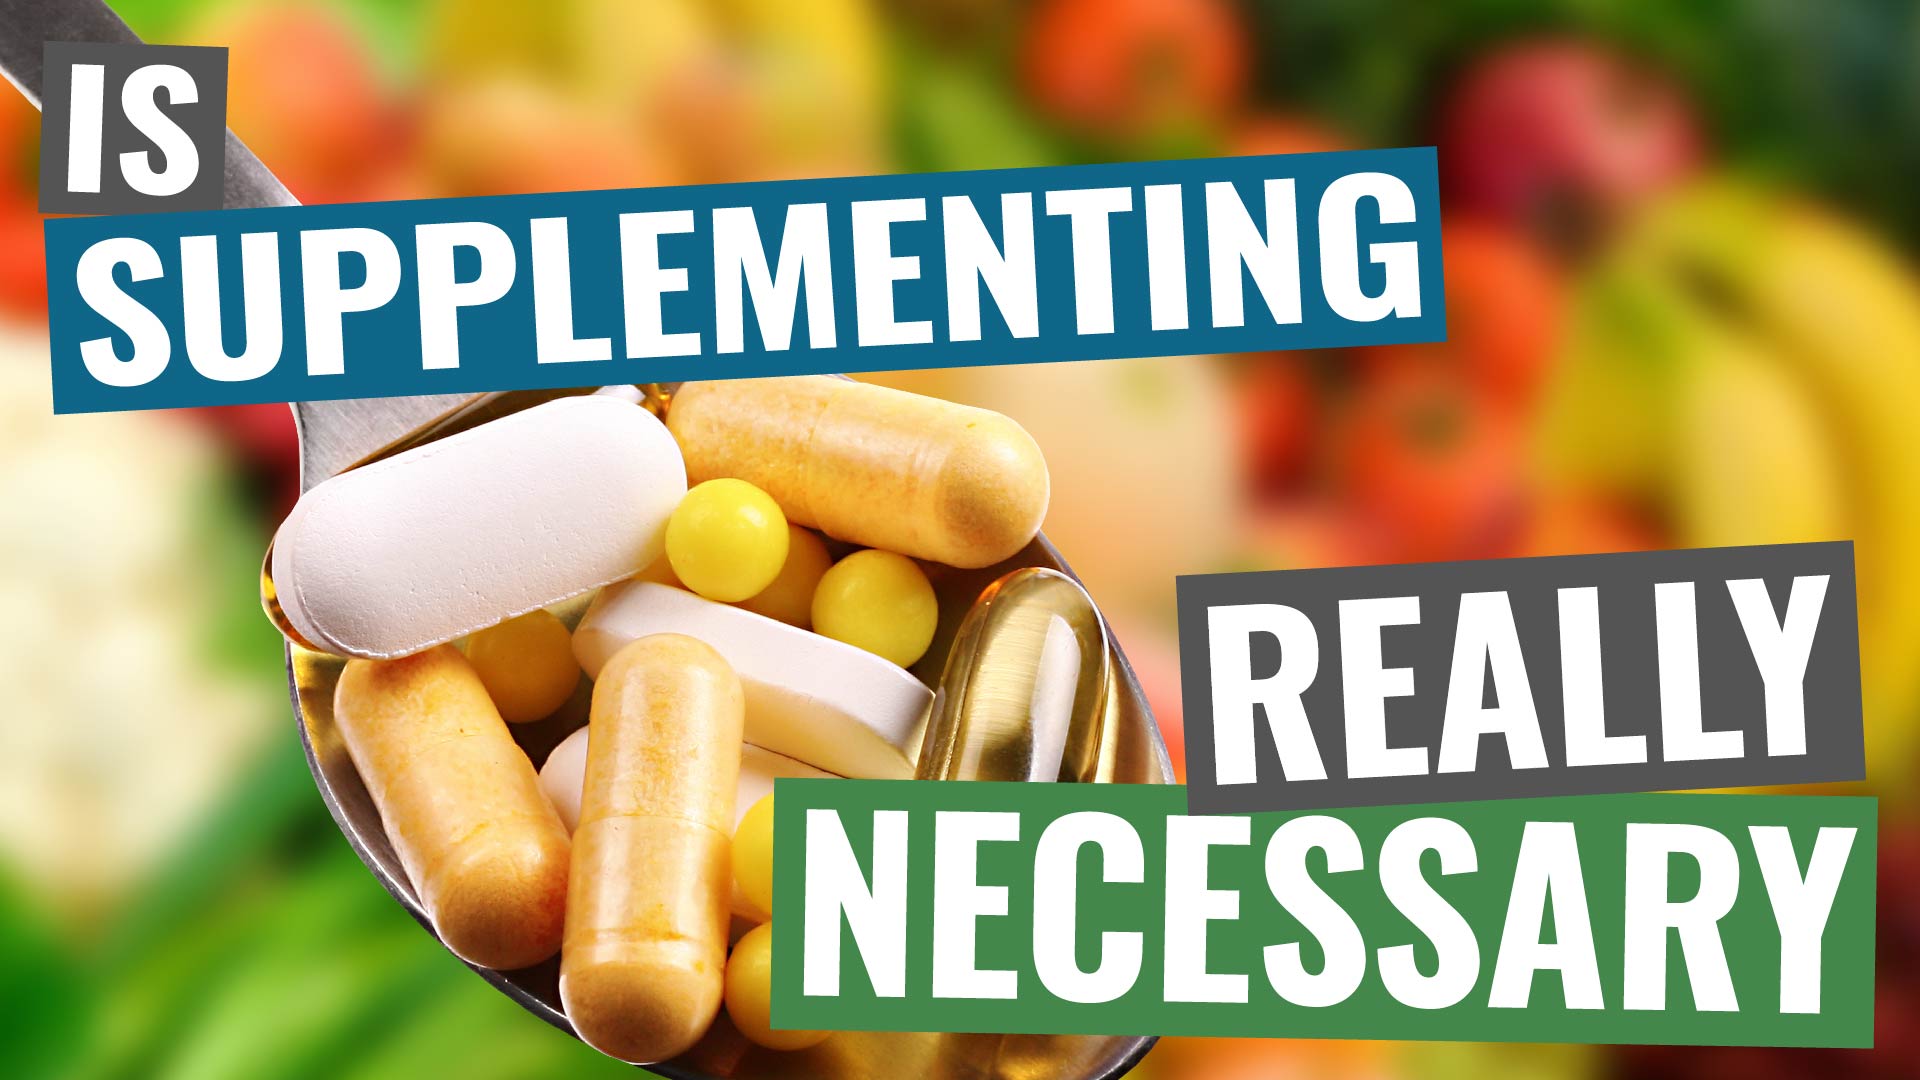 007 – Is Supplementing Necessary